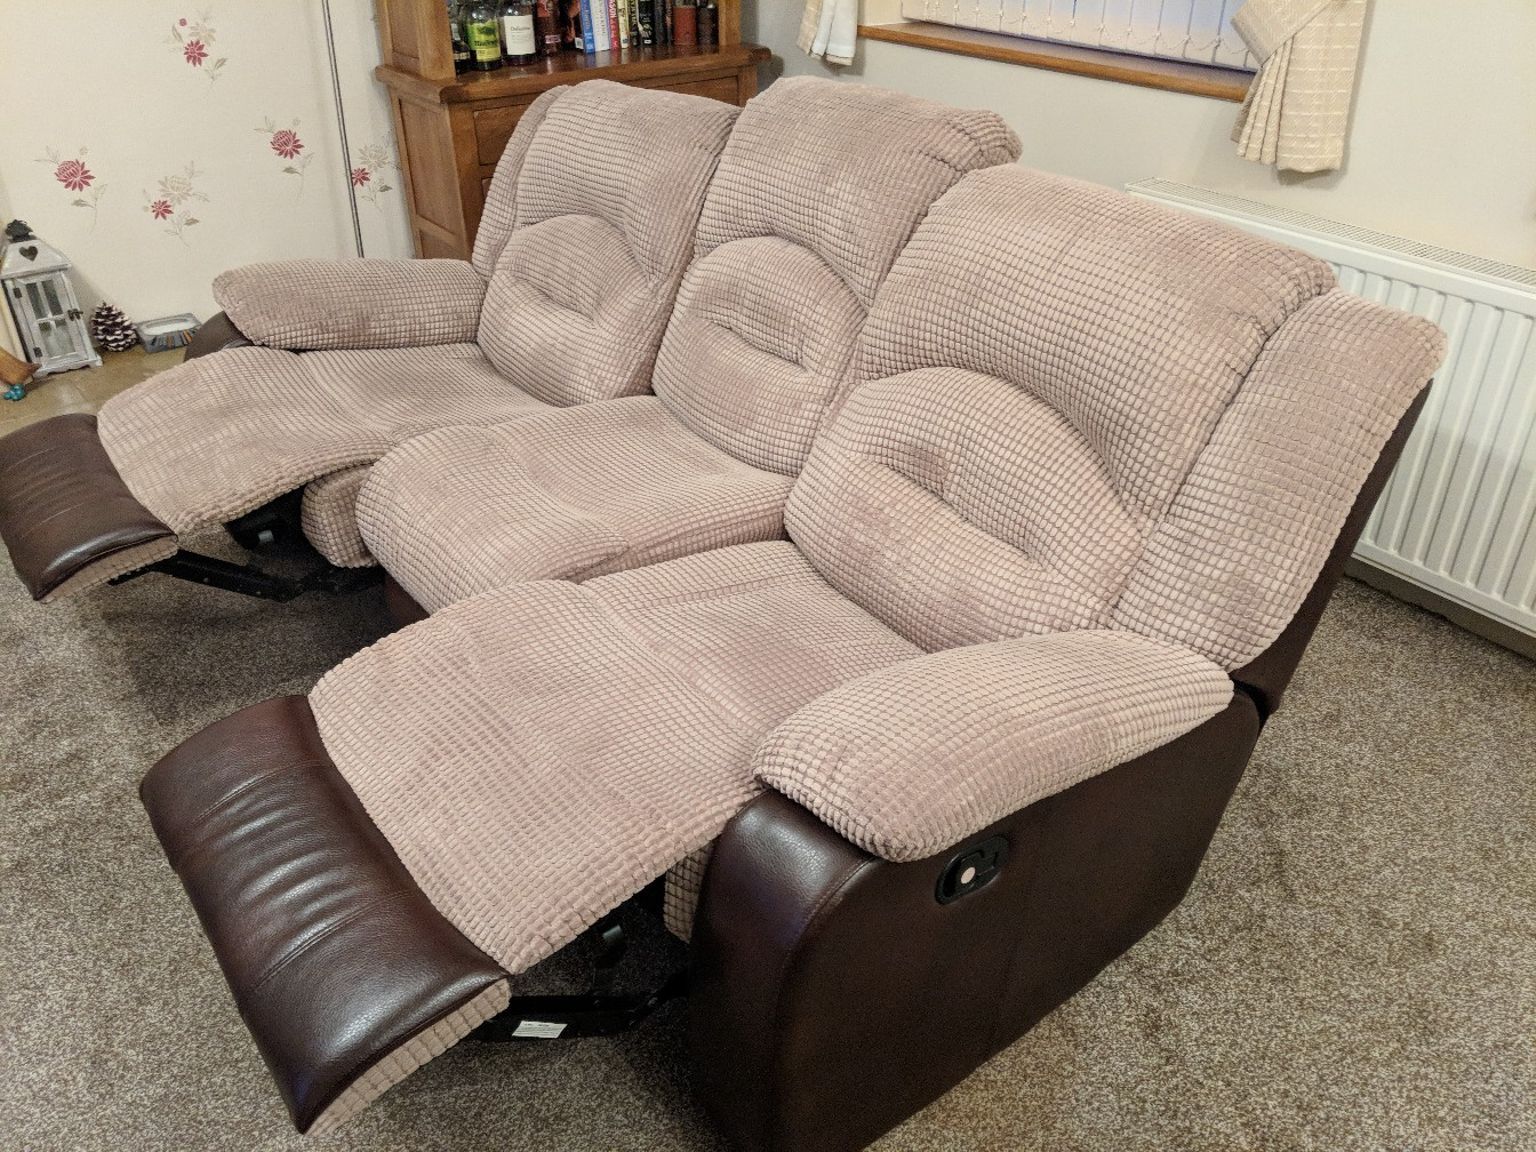 Https://en.shpock/i/wnxnwvk_gmejufmu/ 2018 02 07t19:35:00 In Moana Blue Leather Power Reclining Sofa Chairs With Usb (Photo 19 of 25)